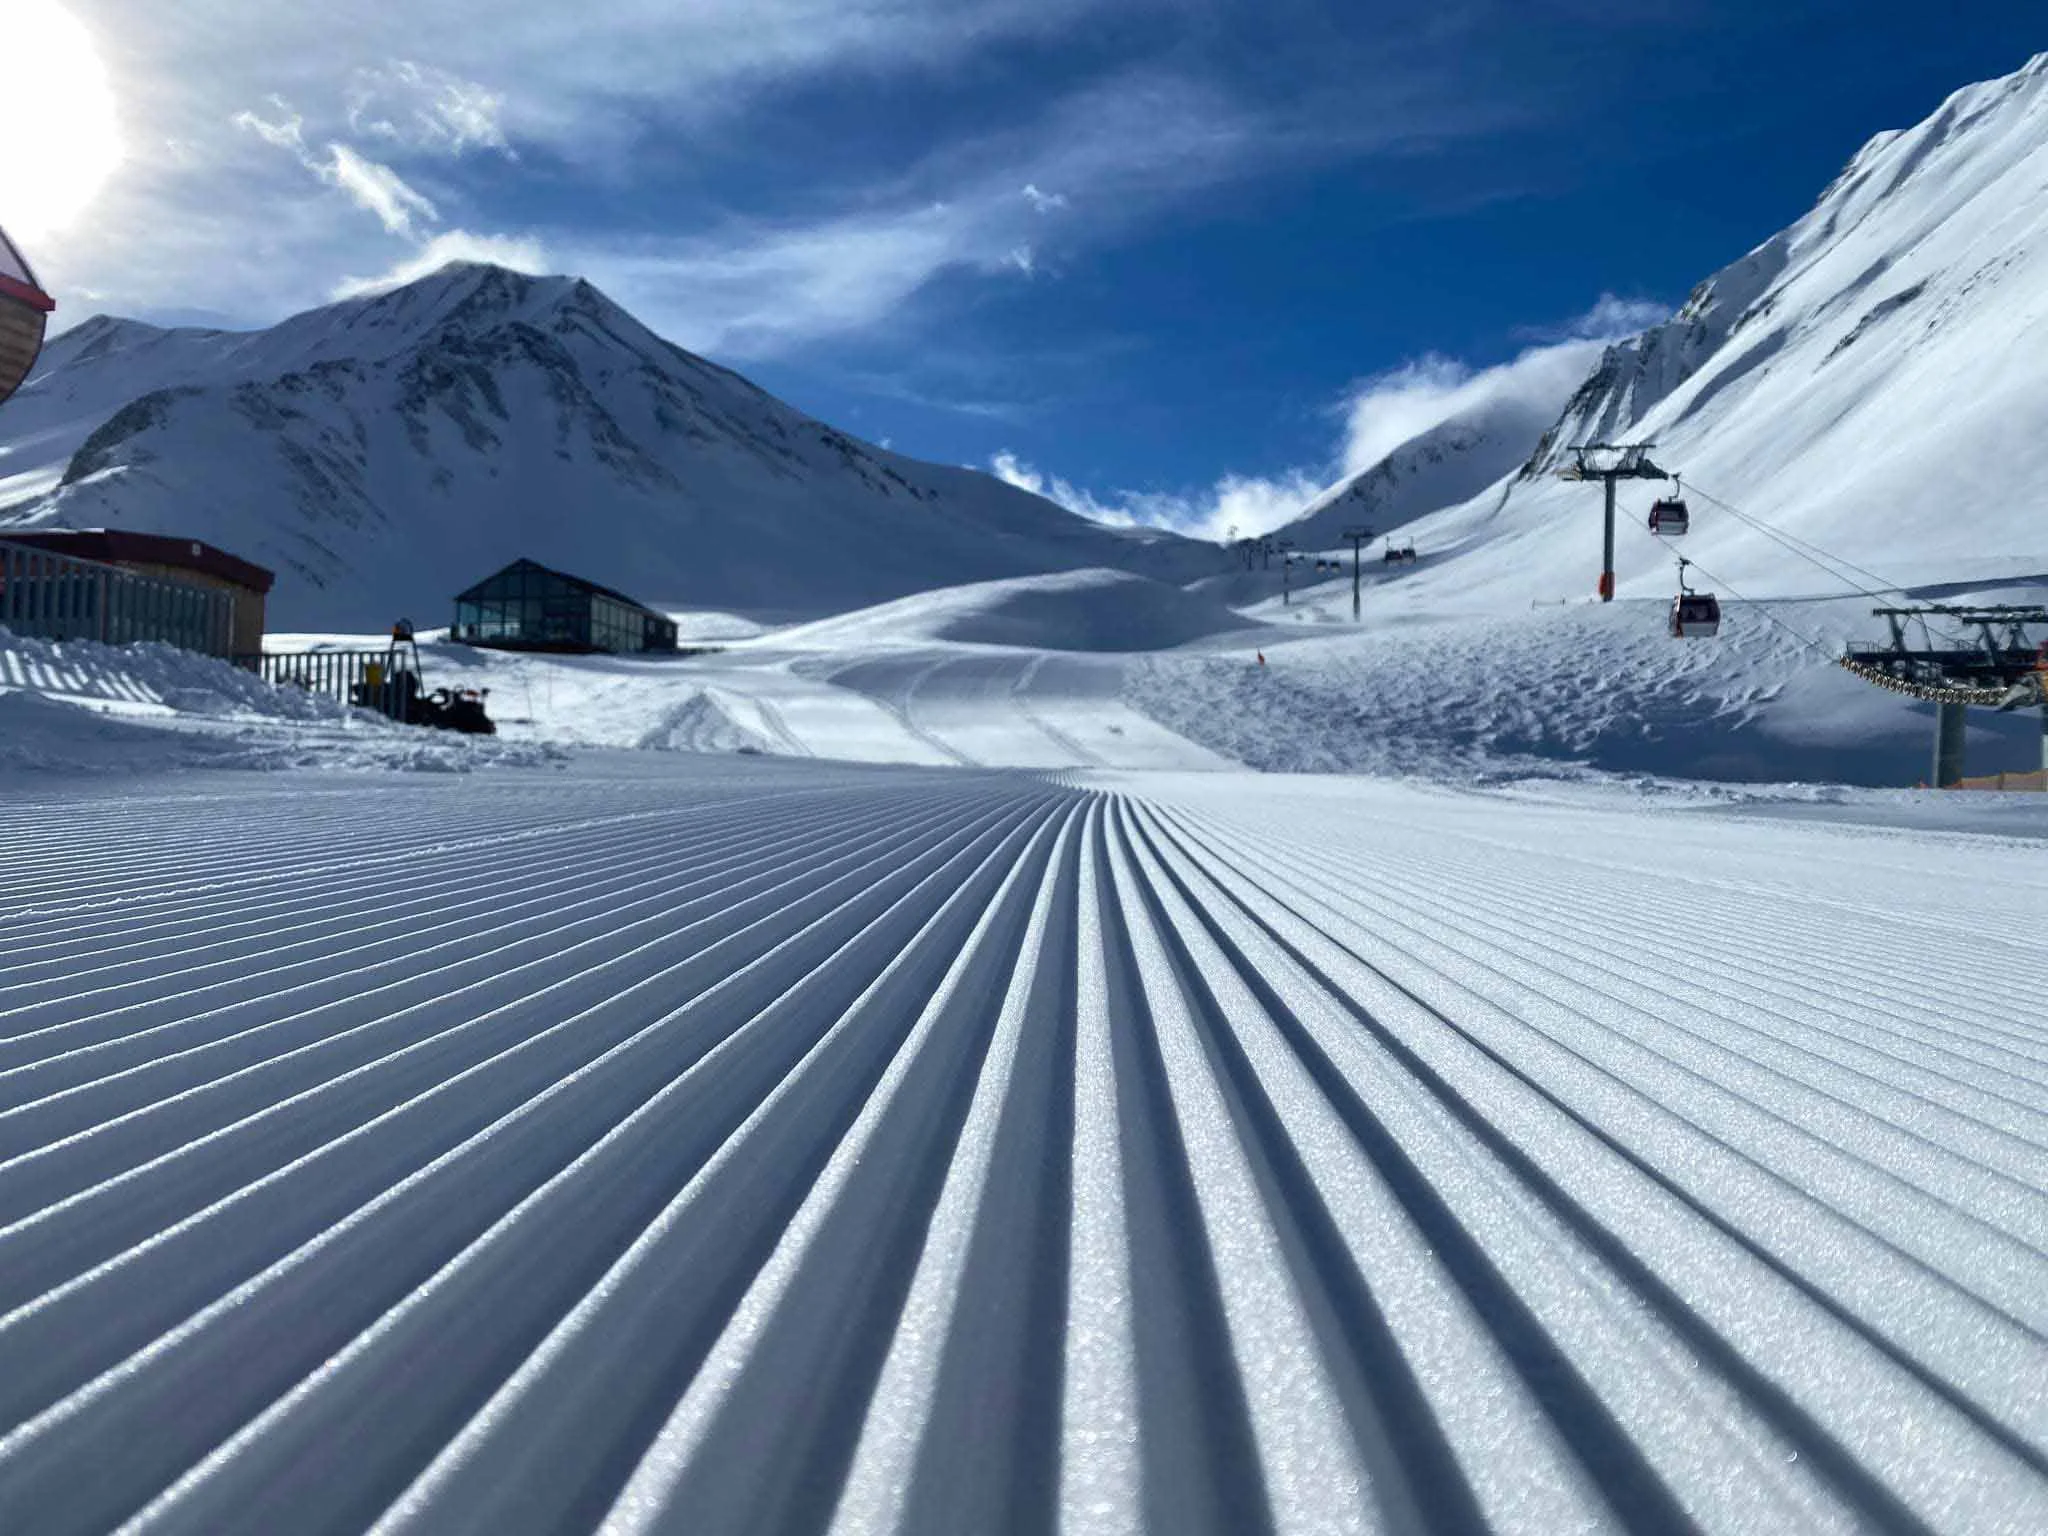 perfect corduroy, photo taken from the floor